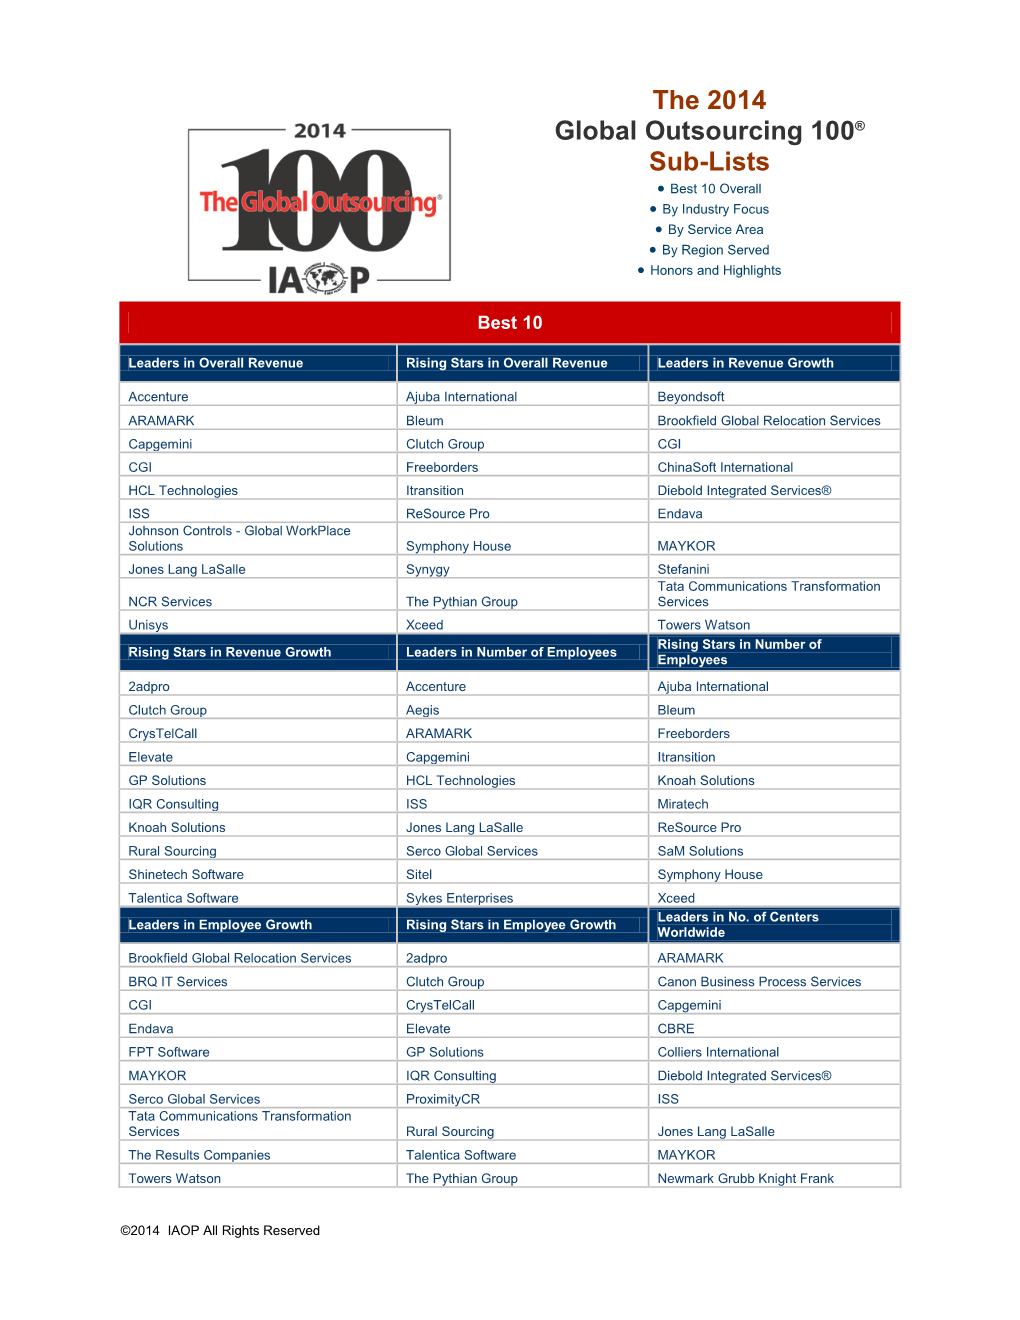 The 2014 Global Outsourcing 100® Sub-Lists • Best 10 Overall • by Industry Focus • by Service Area • by Region Served • Honors and Highlights